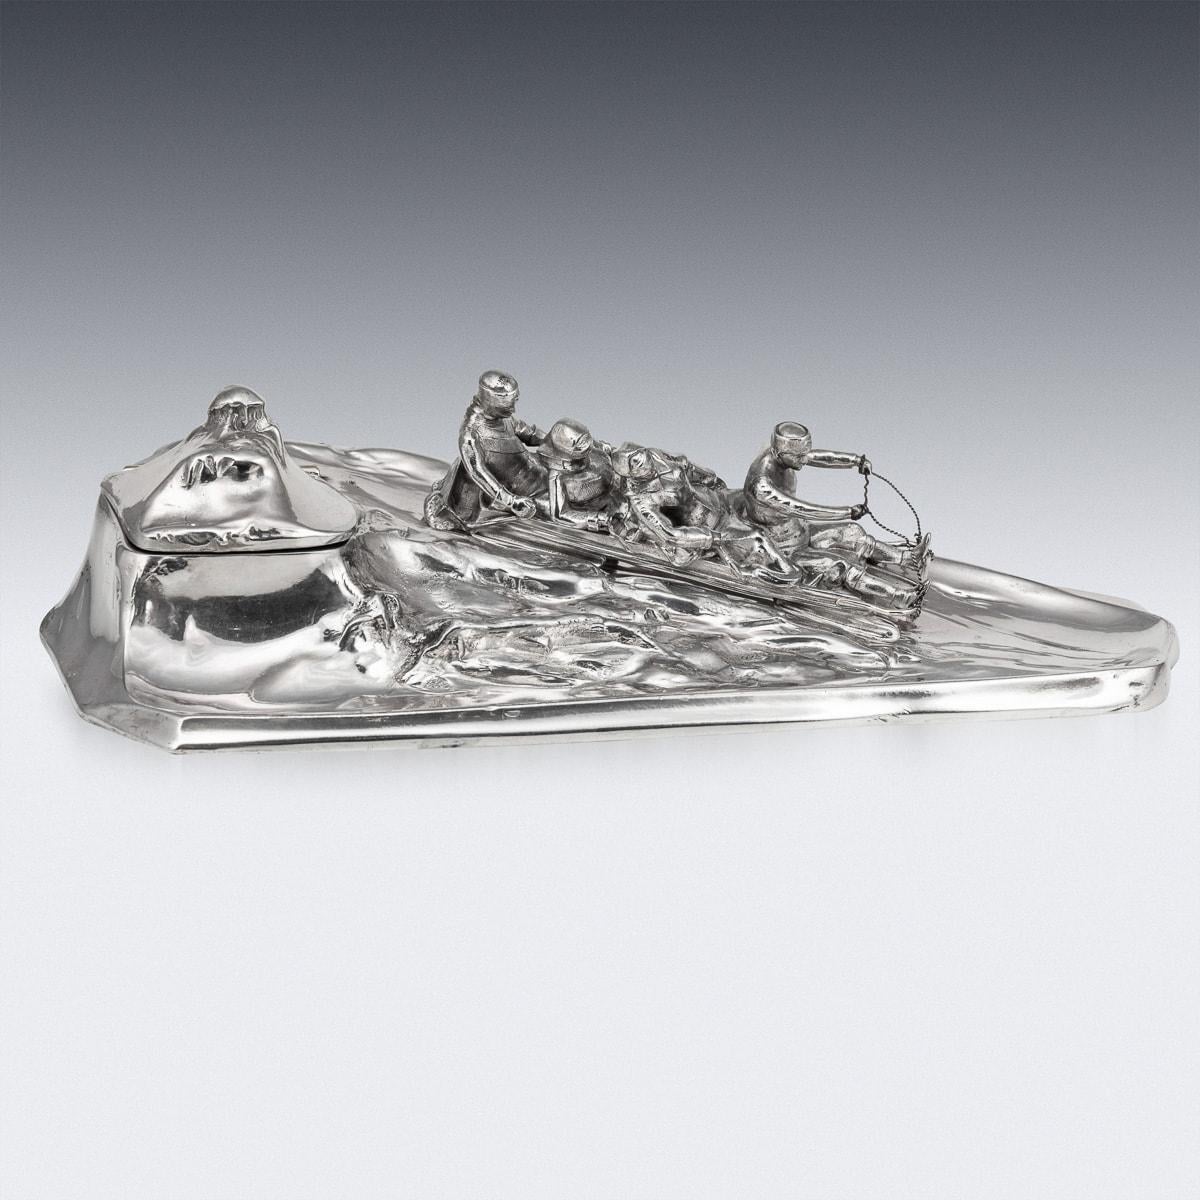 Antique 20th Century German silver plated inkwell depicting a group of children on a toboggan sliding down the mountain, under one of the mountain peaks is a glass lined inkwell. A fabulous item to add as a desk accessory. Stamped on the underneath